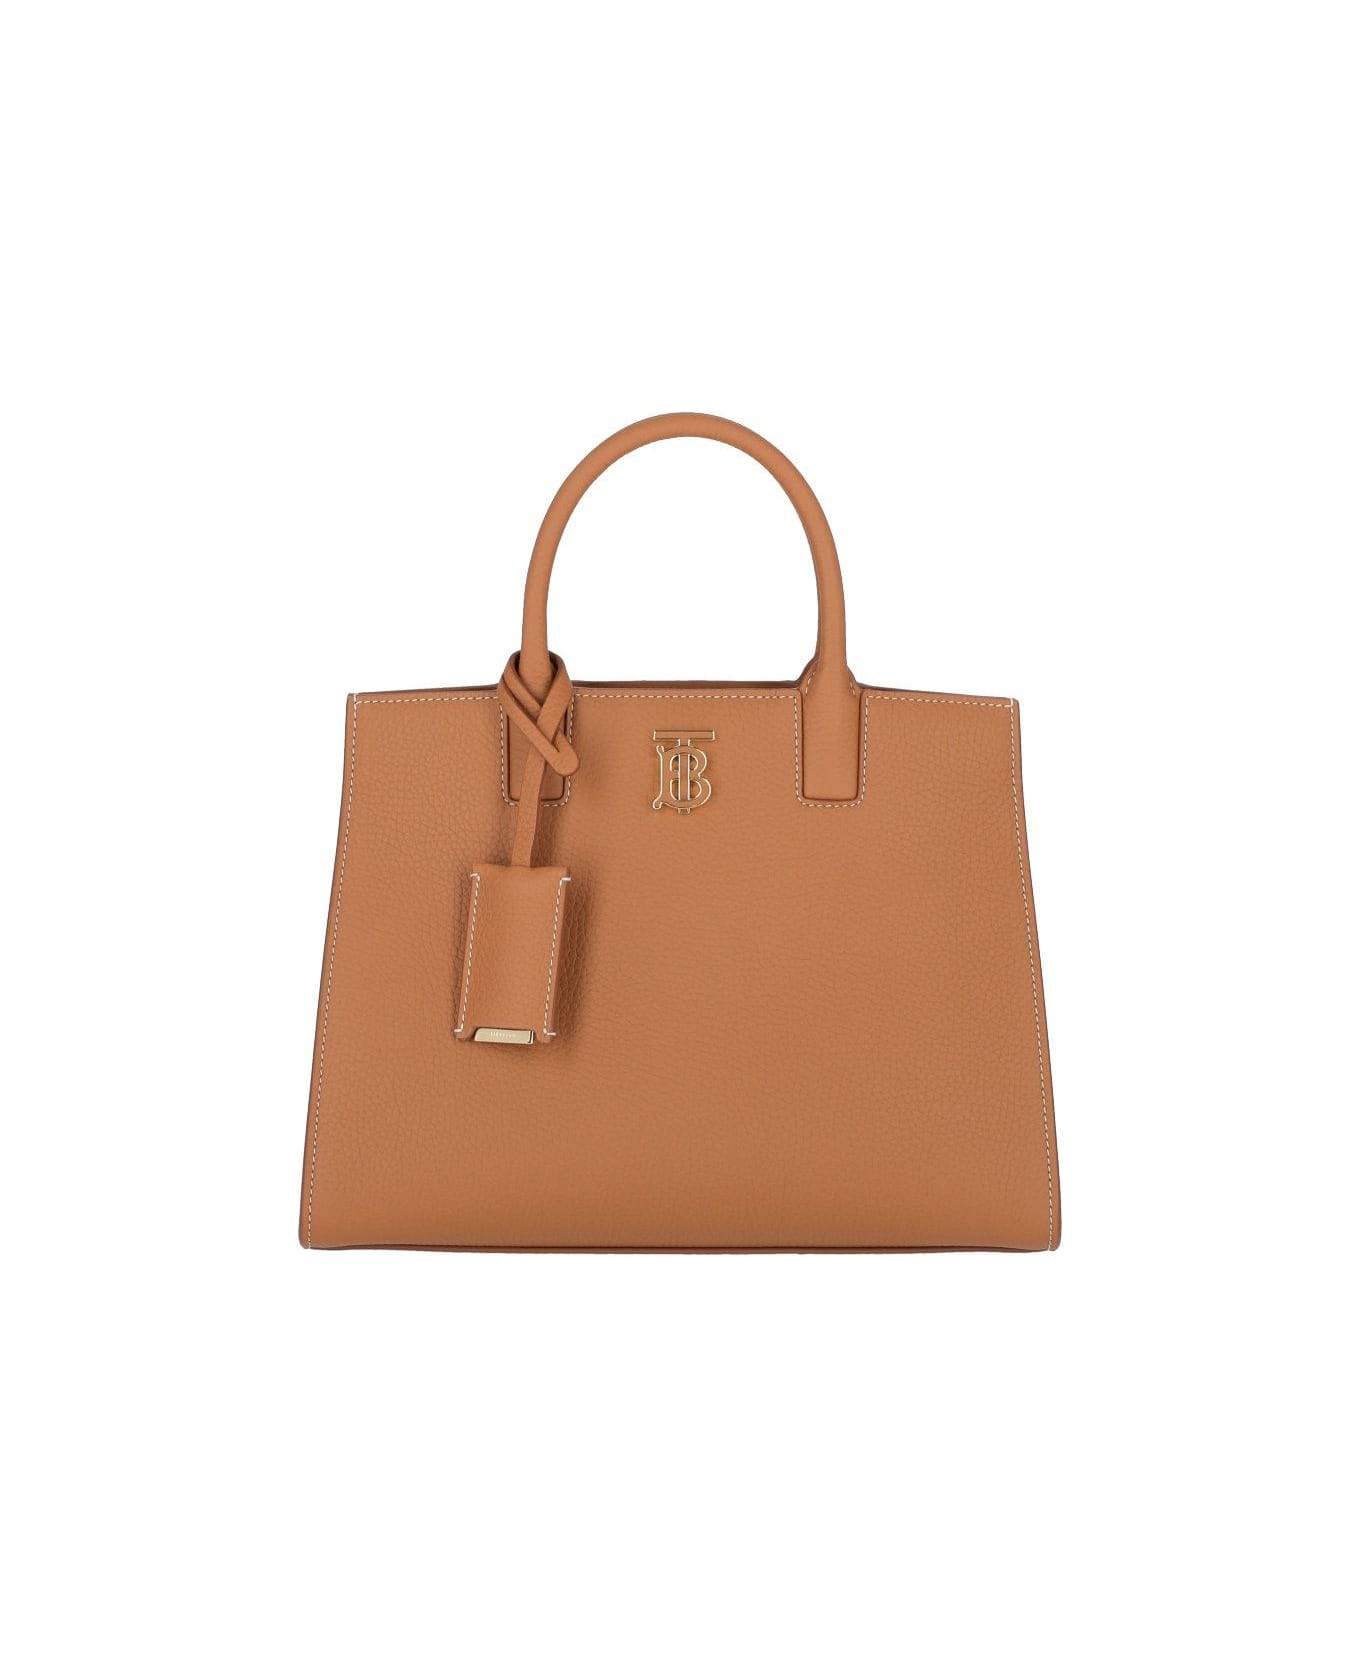 Burberry Mini Frances Top Handle Bag - is the perfect bag for overnight stays and weekends away